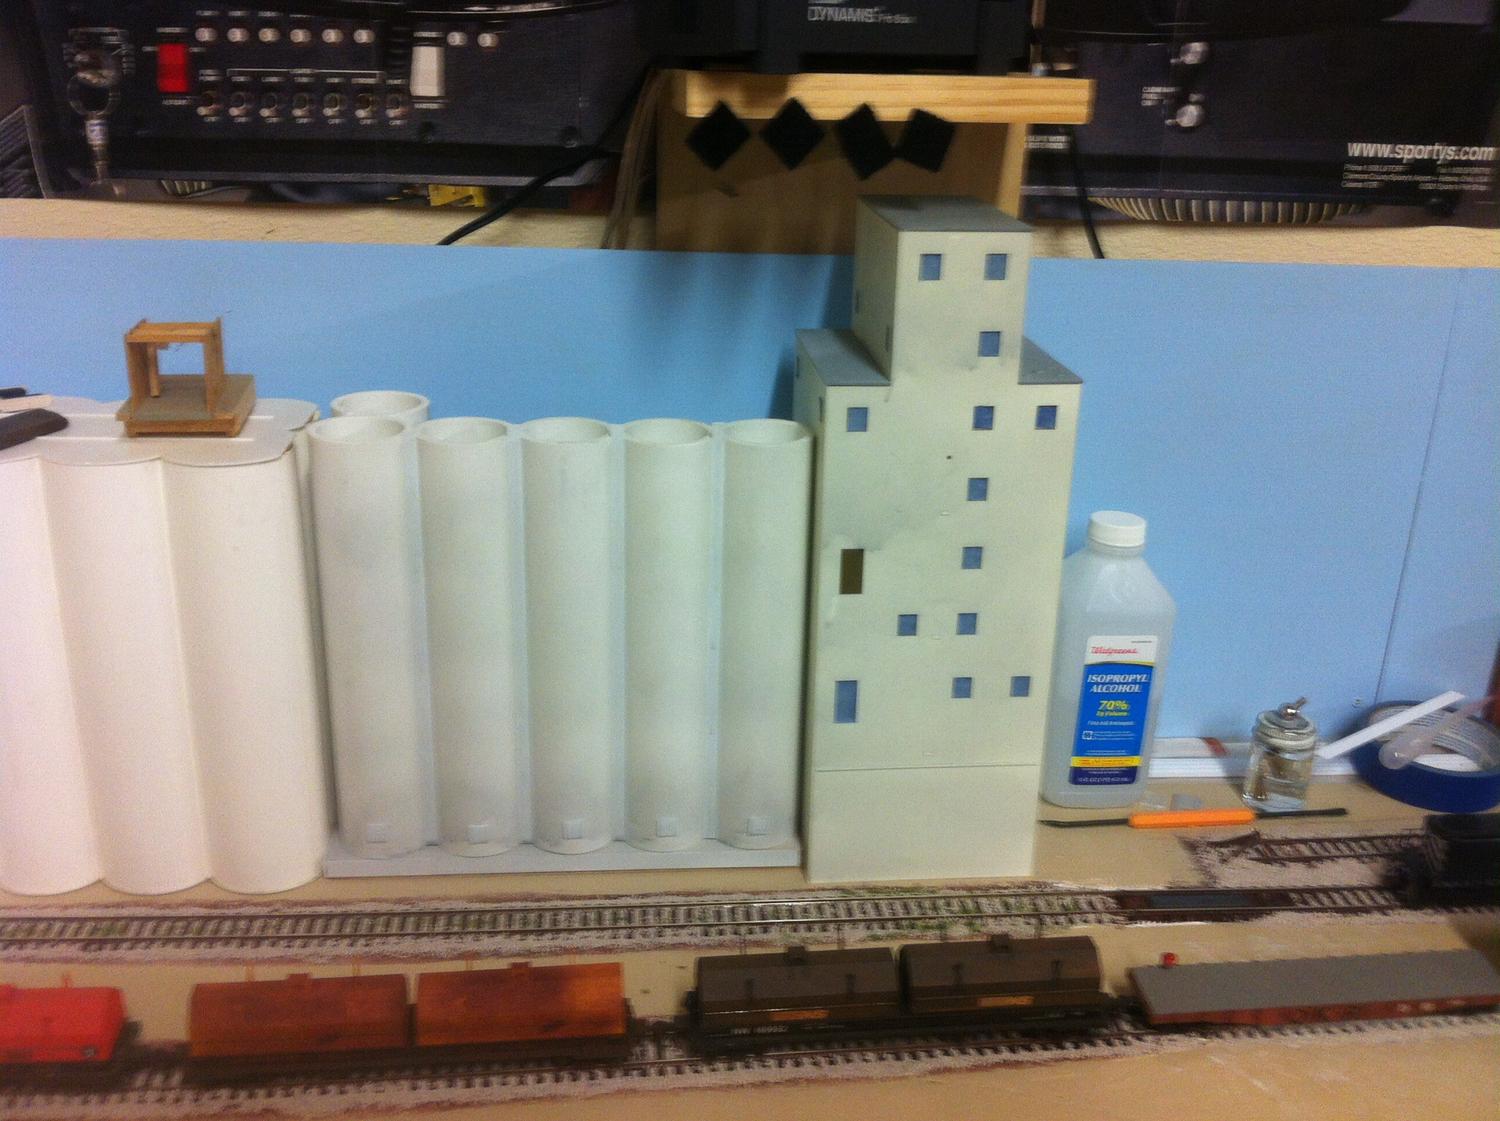 Kit bashing the Walthers Grain Elevator, I am using PVC pipe for the barrels. I plan to extend the capacity of the structure and add some metal silos as well.